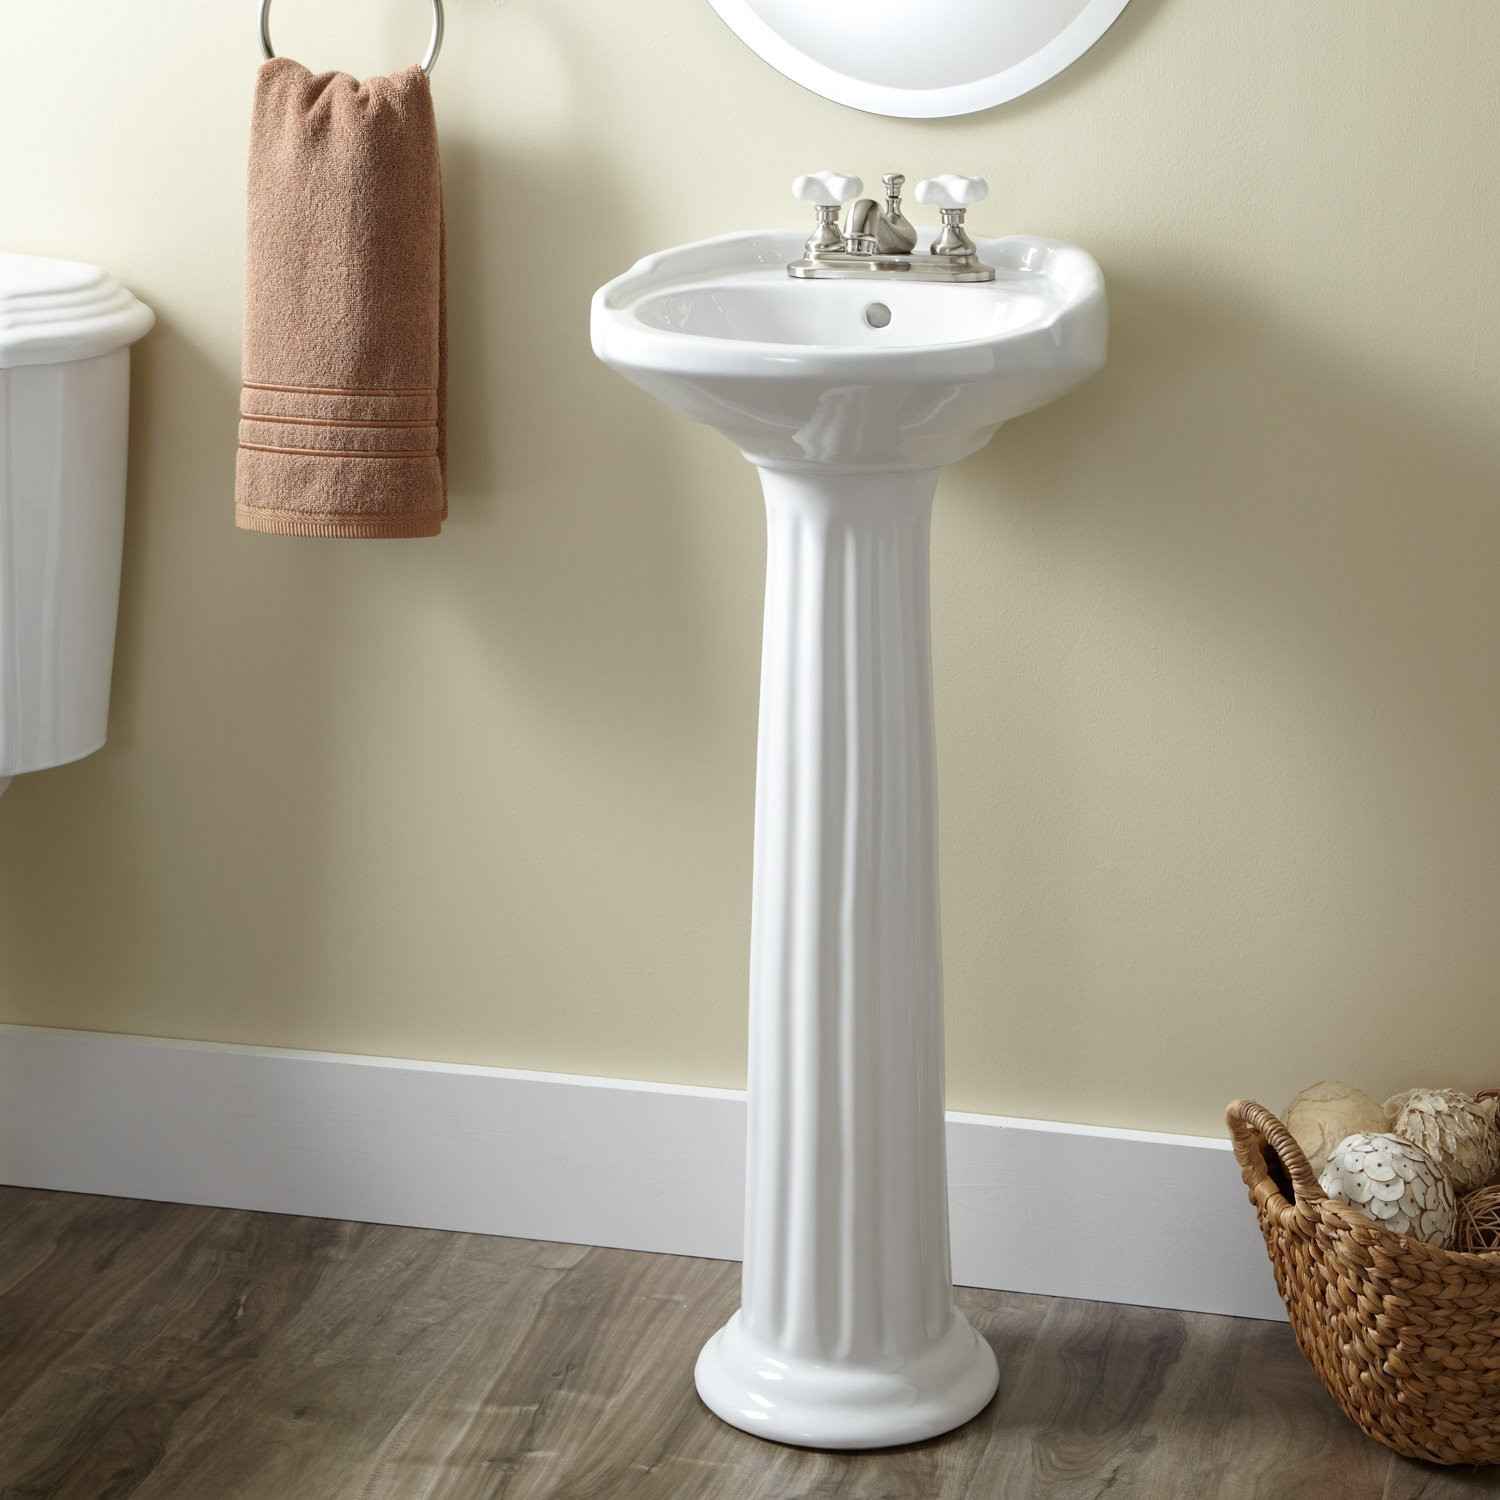 Best Bathroom Sinks
 Everything You Need To Know About Pedestal Bathroom Sinks